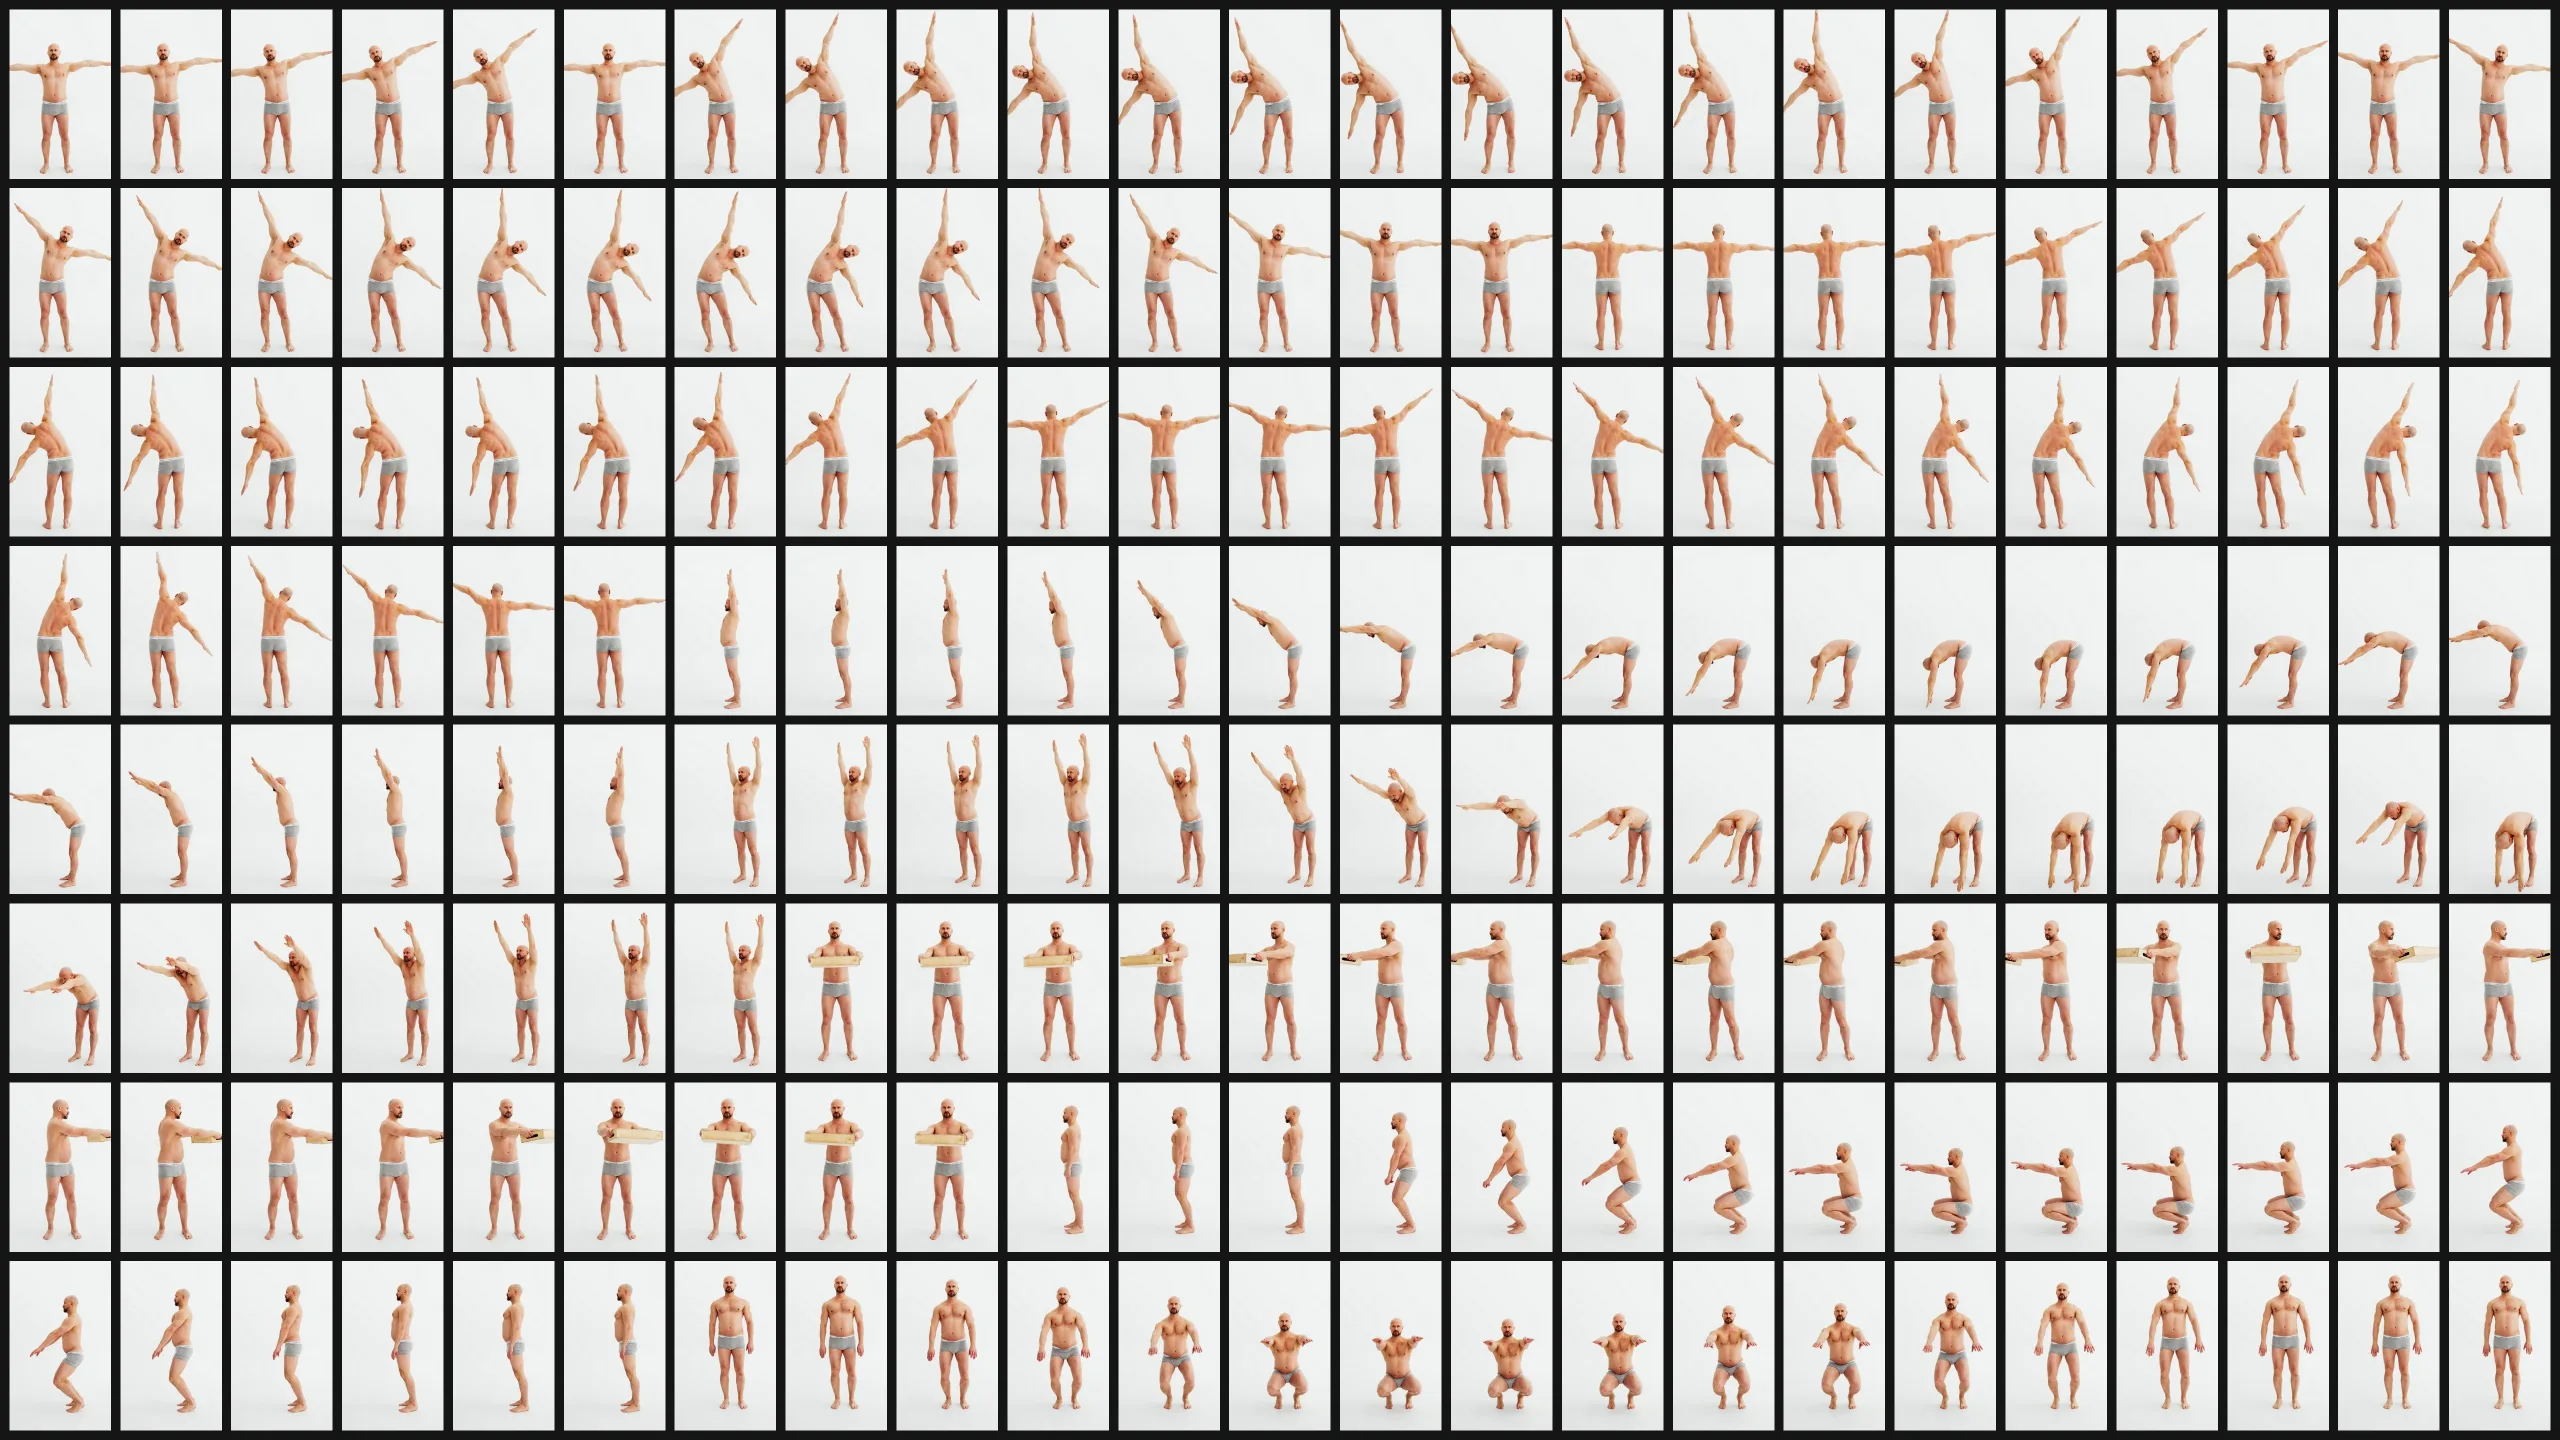 600+ Male Body in Motion - Reference Photos (Sequential Movement)